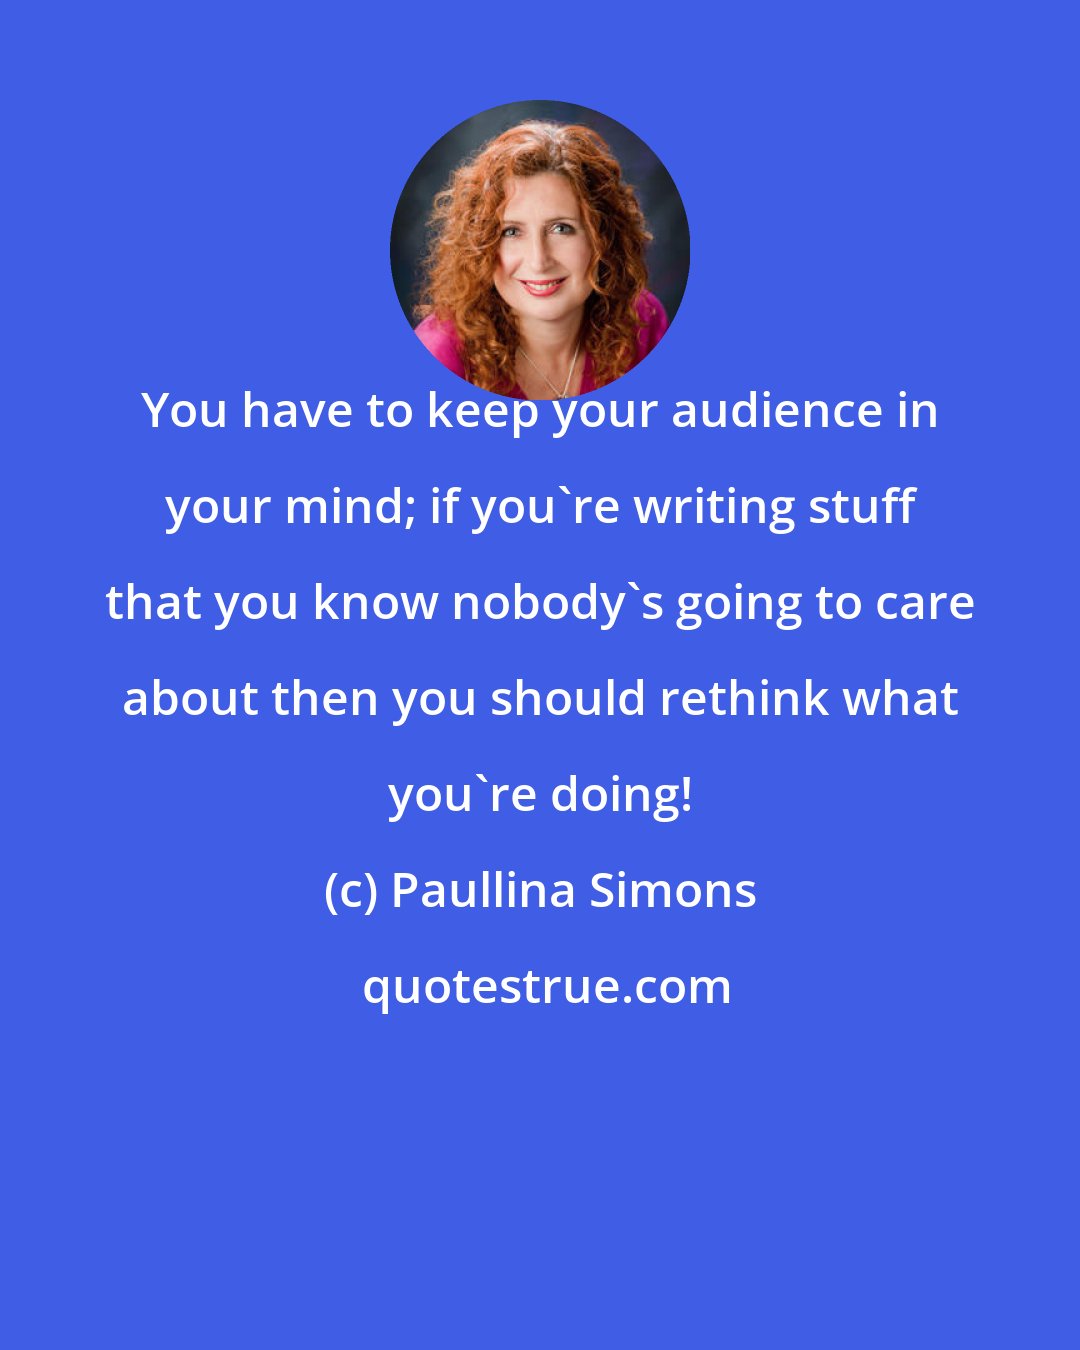 Paullina Simons: You have to keep your audience in your mind; if you're writing stuff that you know nobody's going to care about then you should rethink what you're doing!